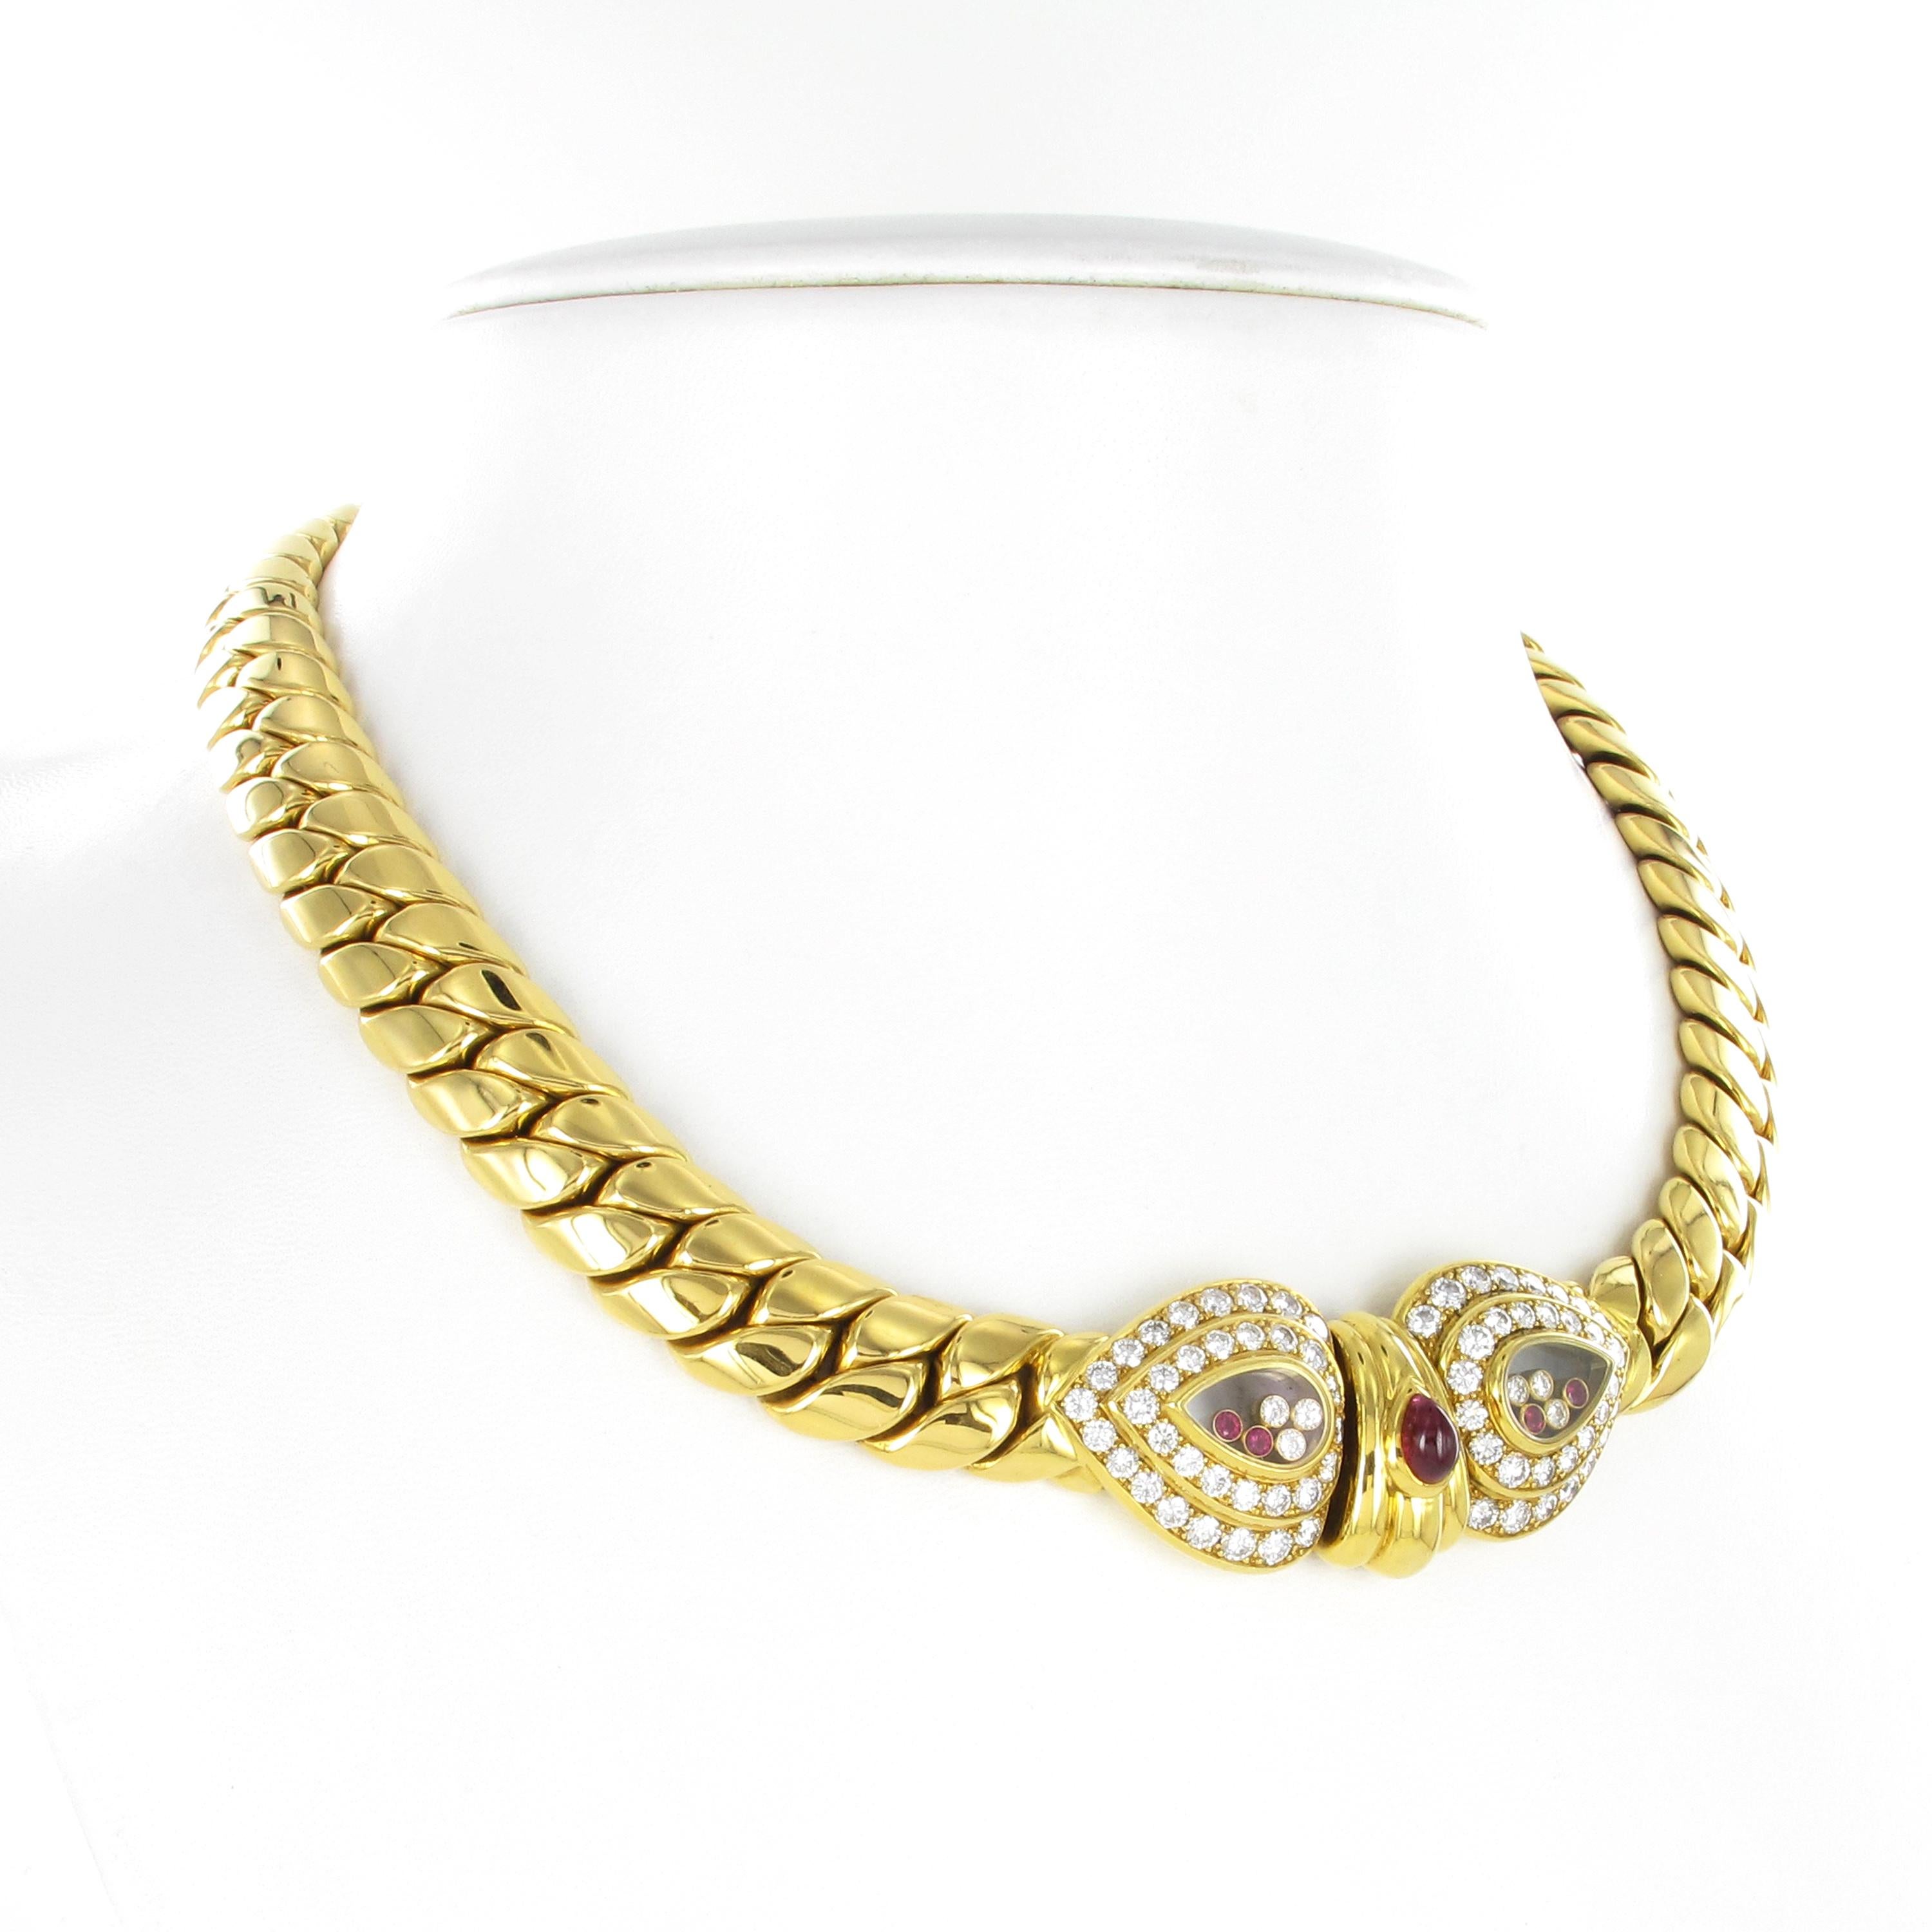 One of a kind Chopard Happy Diamonds necklace in 18 karat yellow gold. The massiv necklace is set with a total of 72 full brilliant-cut diamonds totalling approximate 2.90 ct. Center set with one pear-shape cabochon ruby of approximate 1.20 ct. and